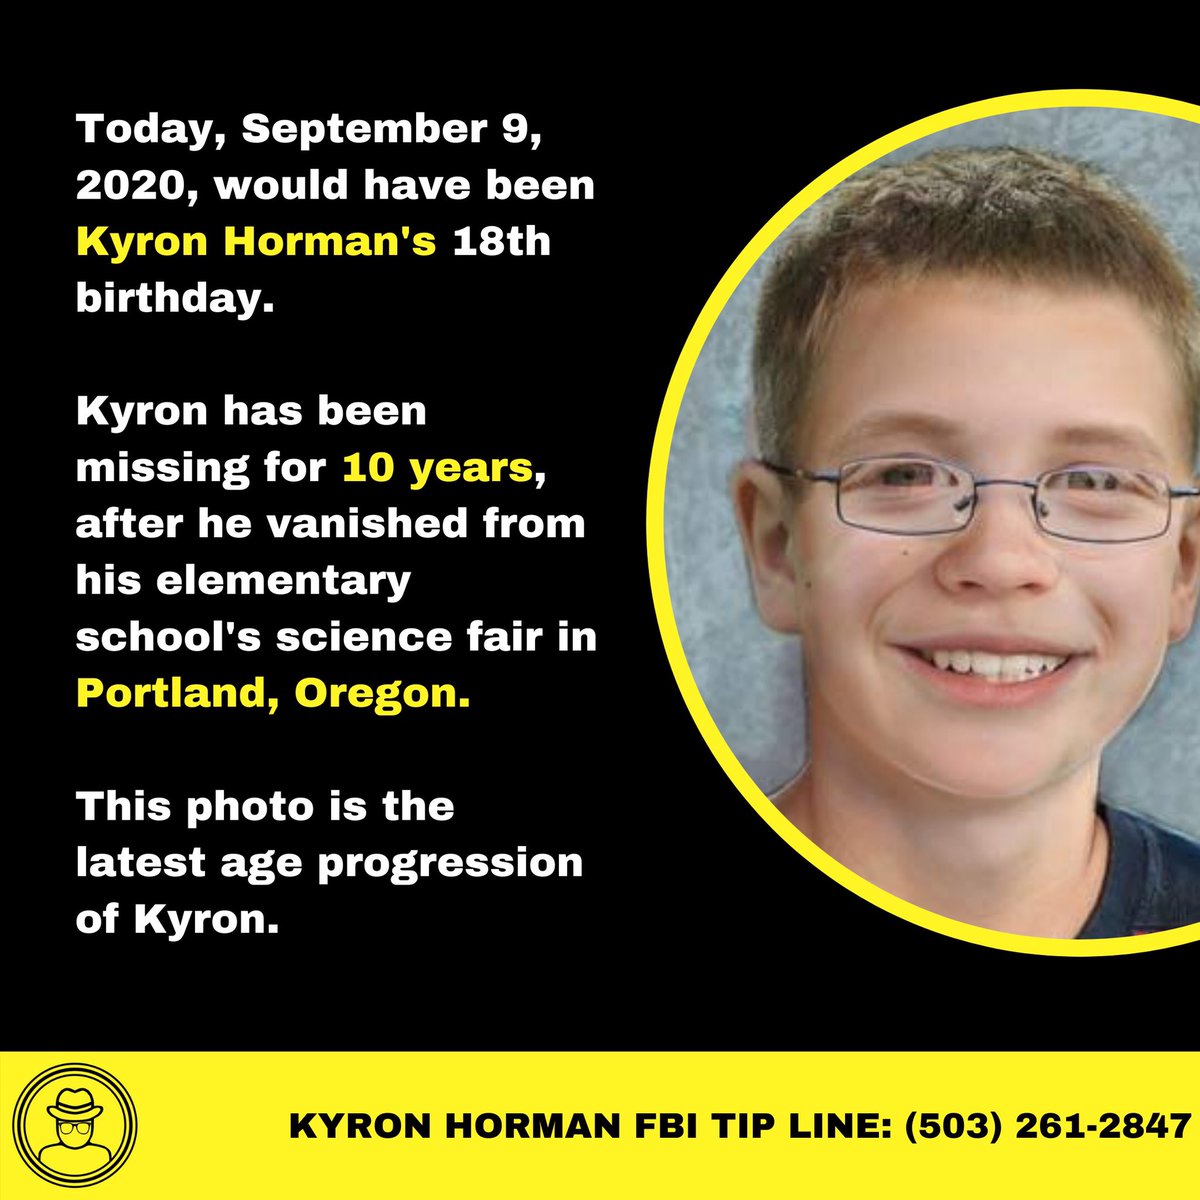 Kyron should be celebrating his 18th bday today. He would’ve graduated from high school this year. Instead, his family is going through the unimaginable—wondering what happened to their 7-yr-old that disappeared w/out a trace 10yrs ago. Someone knows something #JusticeforKyron